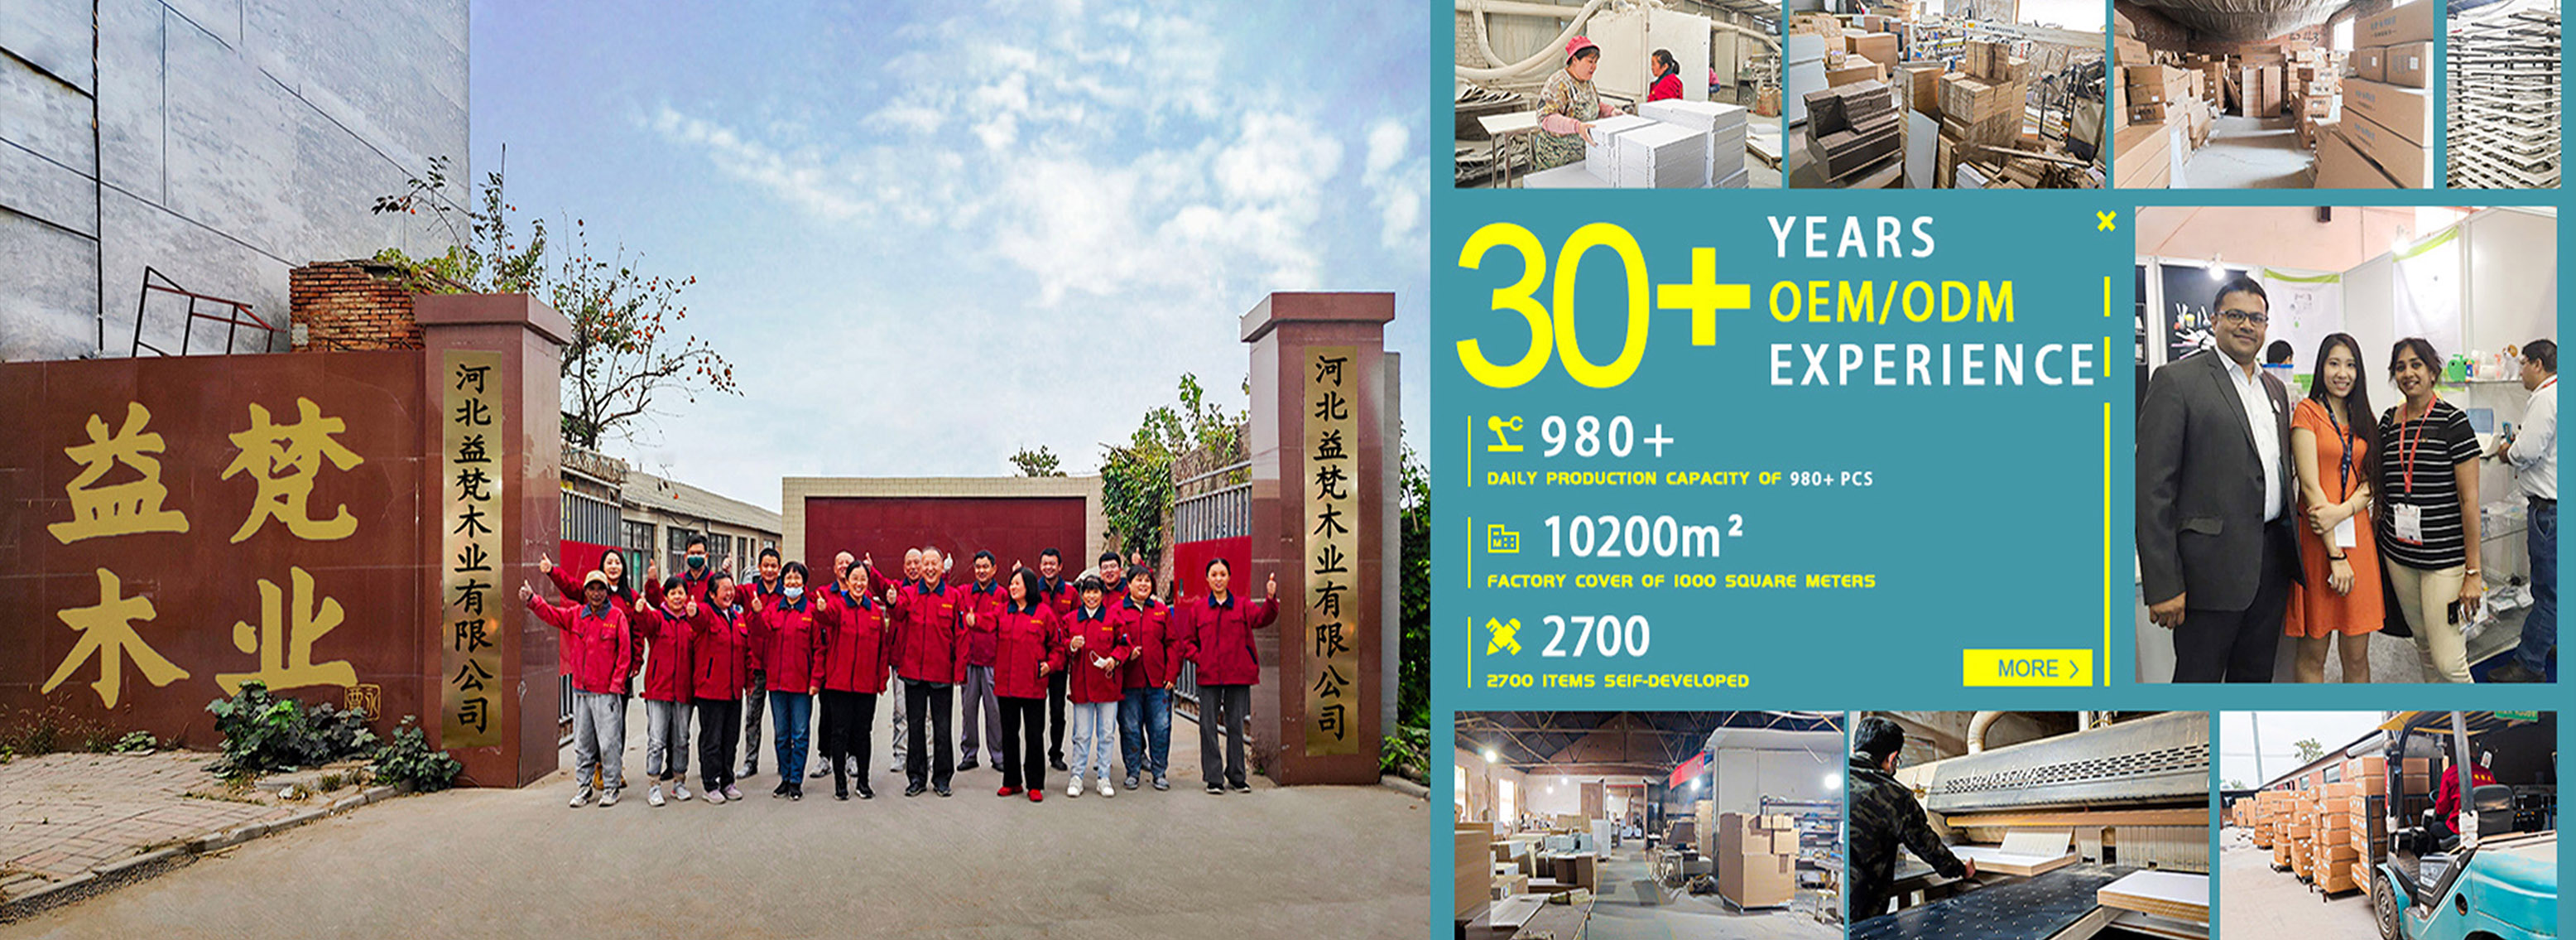 Under 30+ years of production experience, Our factorvcovers a production areg of 10000 sauare meters. we have70professional employees, including 5 technicalengineers, 3 product designers, 4 inspectors, and 7 salesexperts.